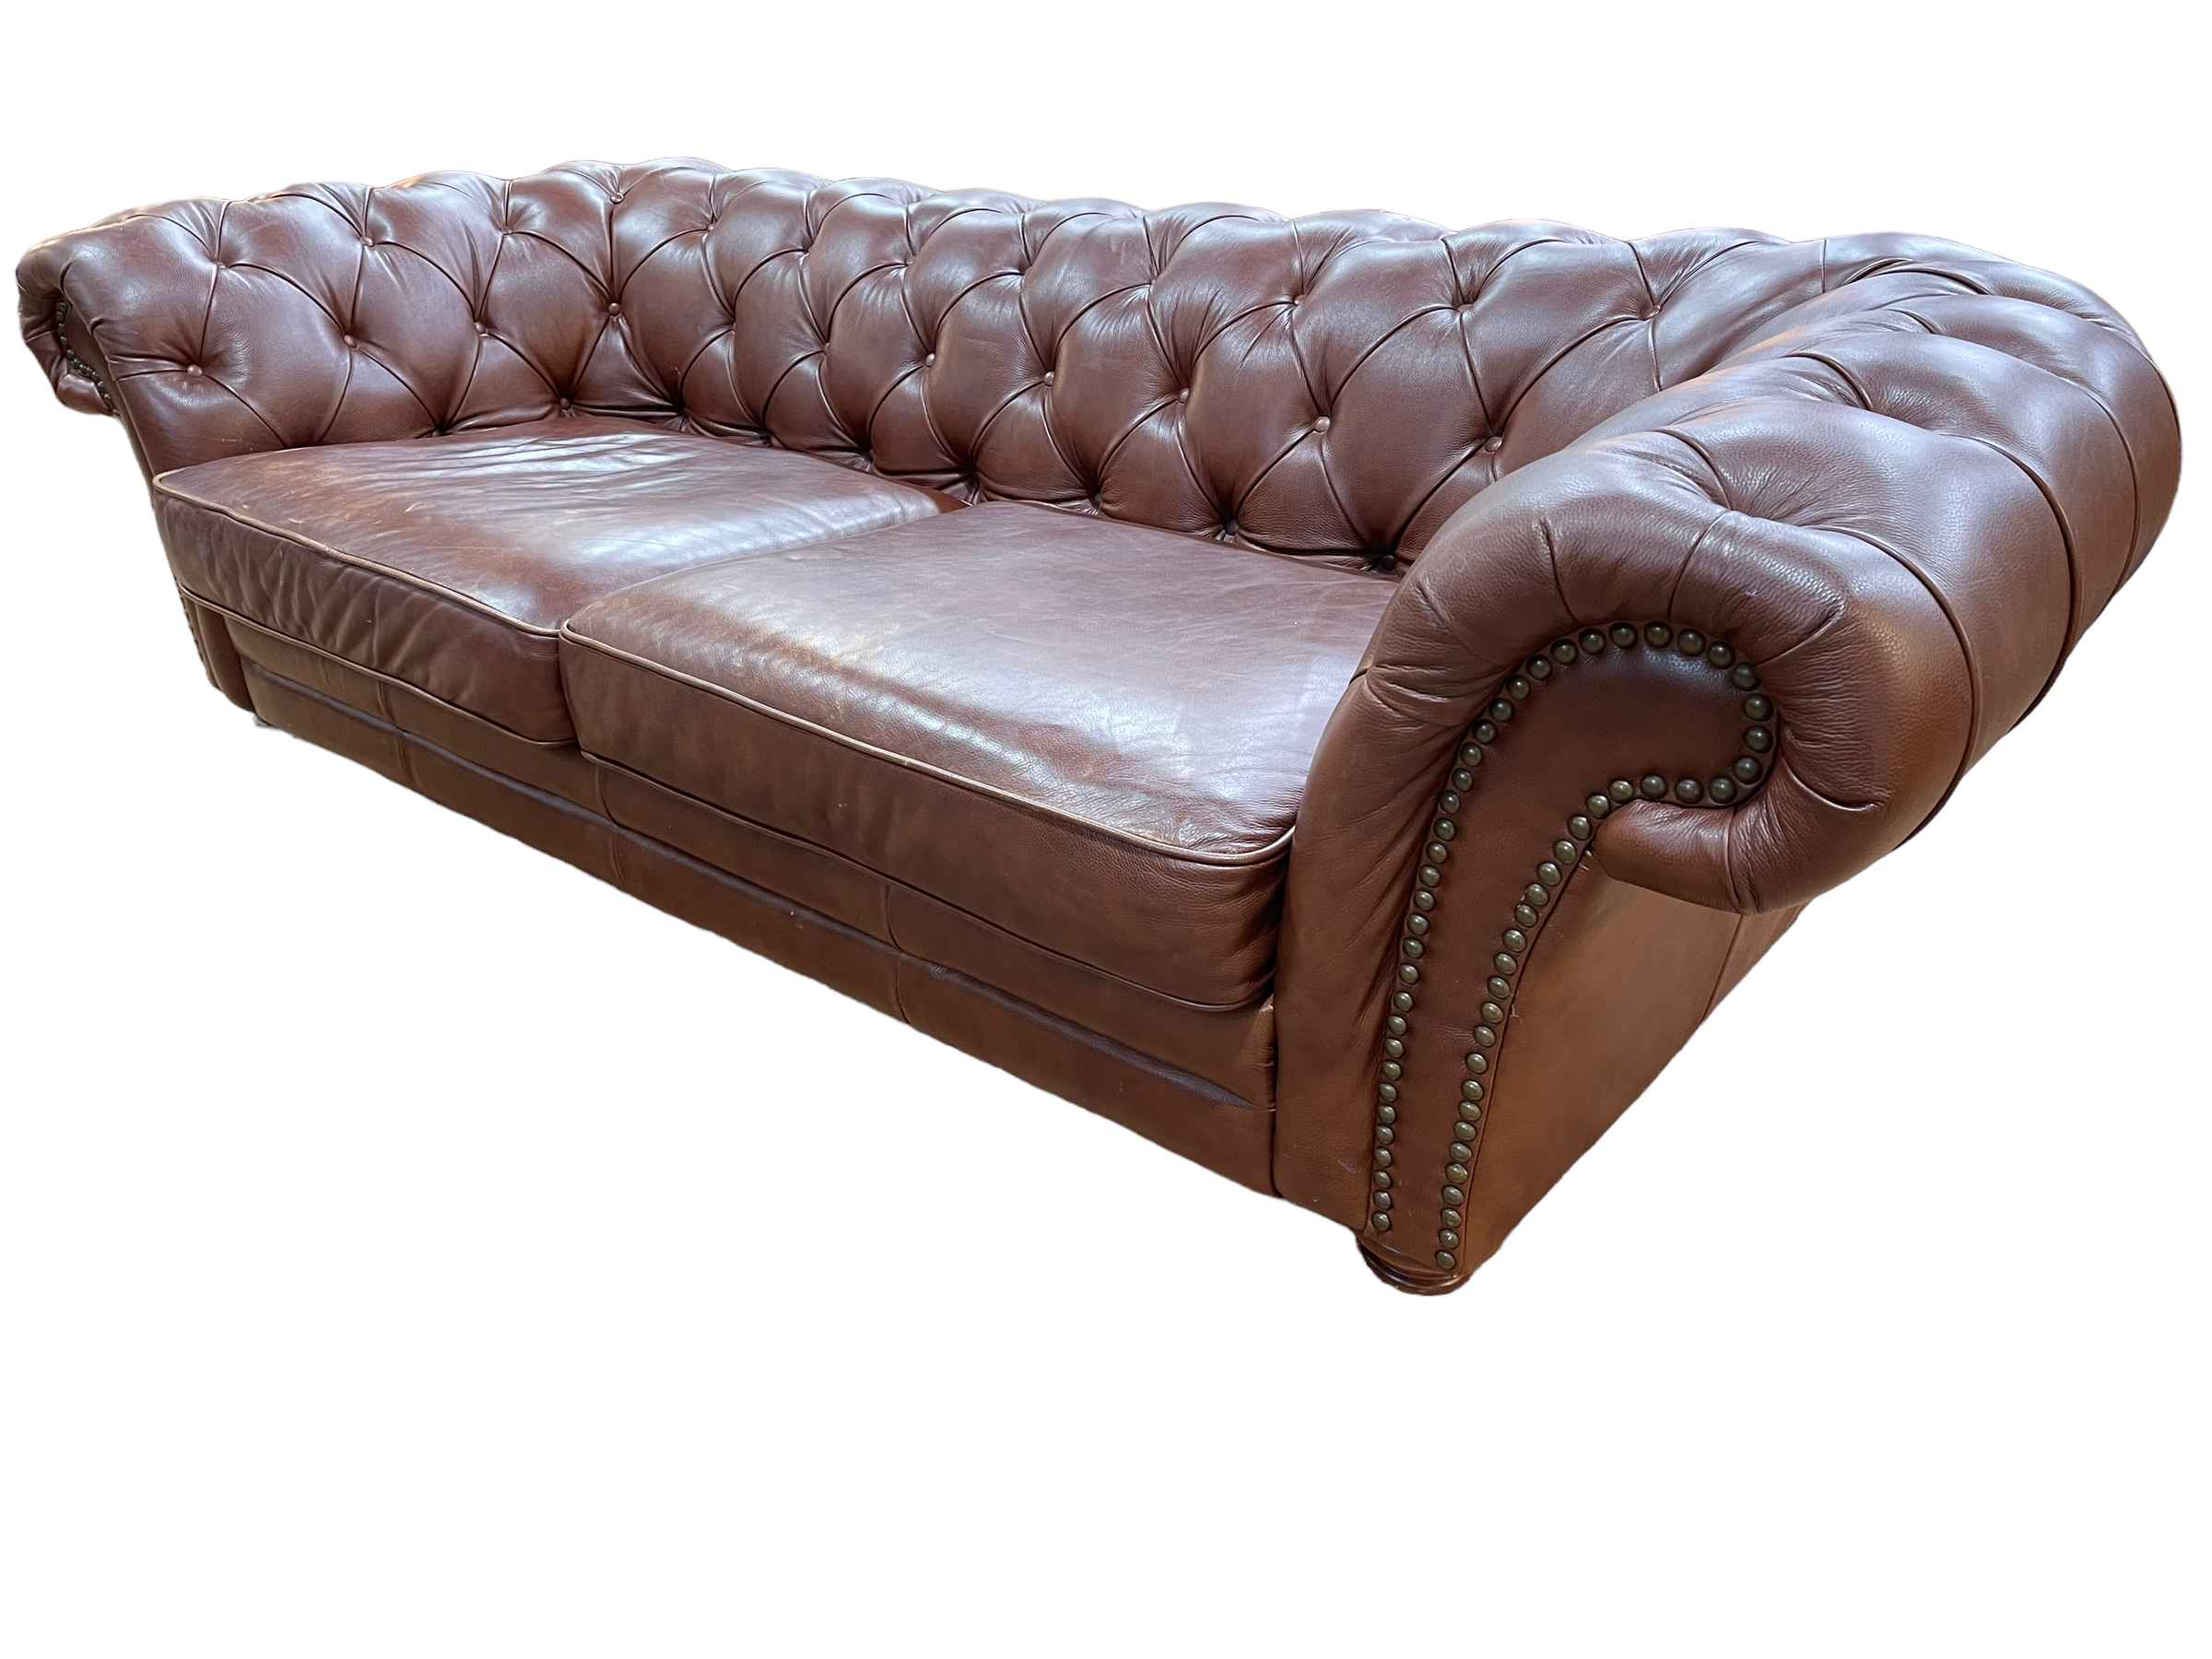 Brown buttoned leather and studded Chesterfield settee, 243cm.